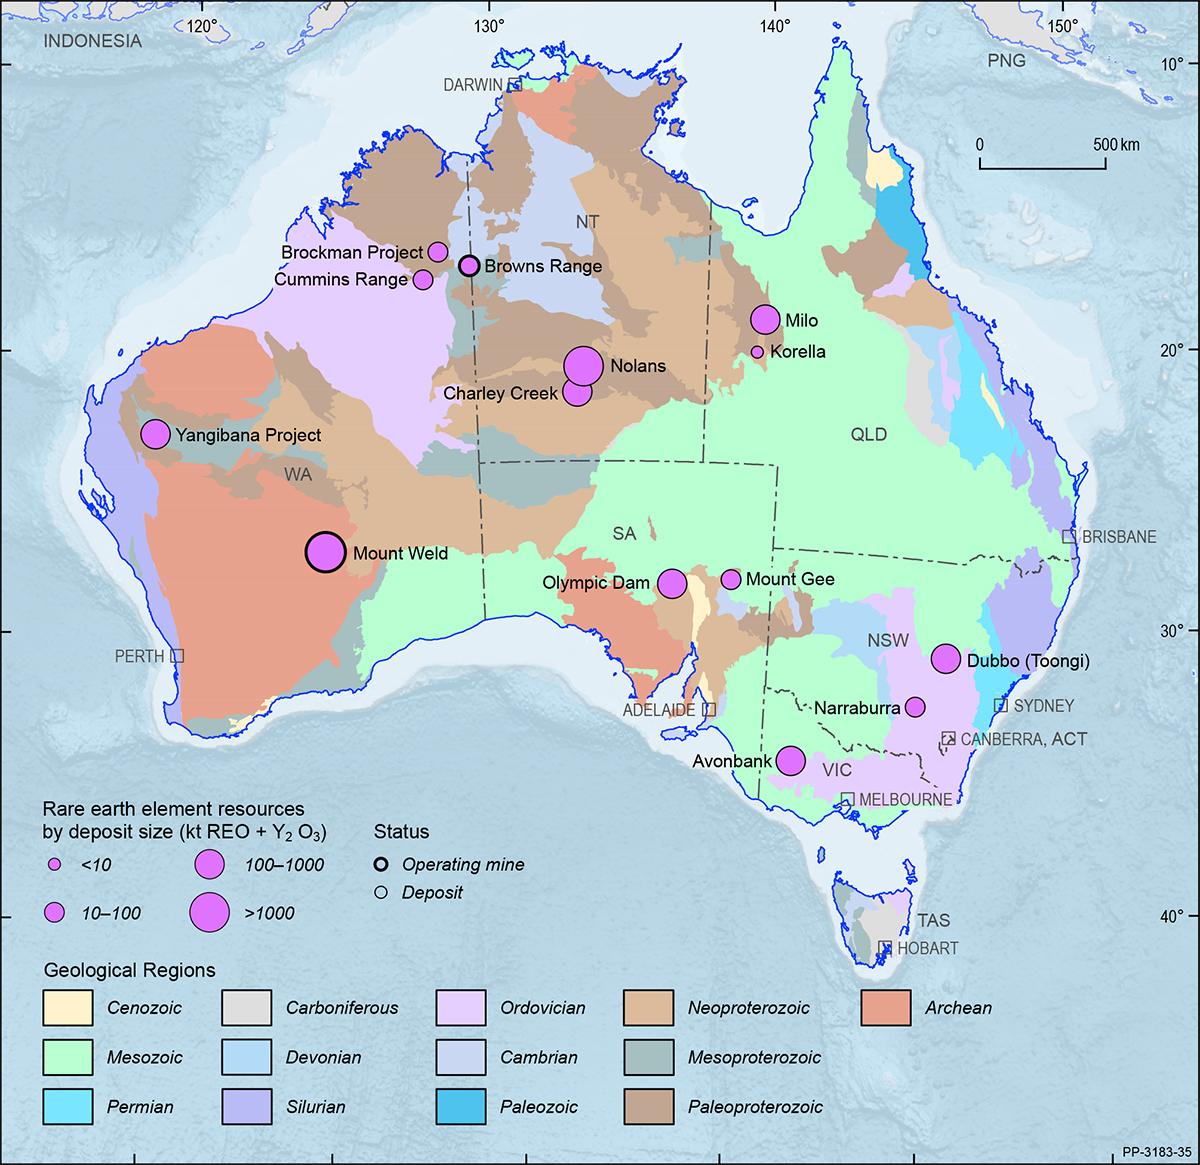 A map showing the Australian continent shaded by the ages of the main geological provinces highlighting the geographical distribution of Australian rare earth element deposits in 2019.